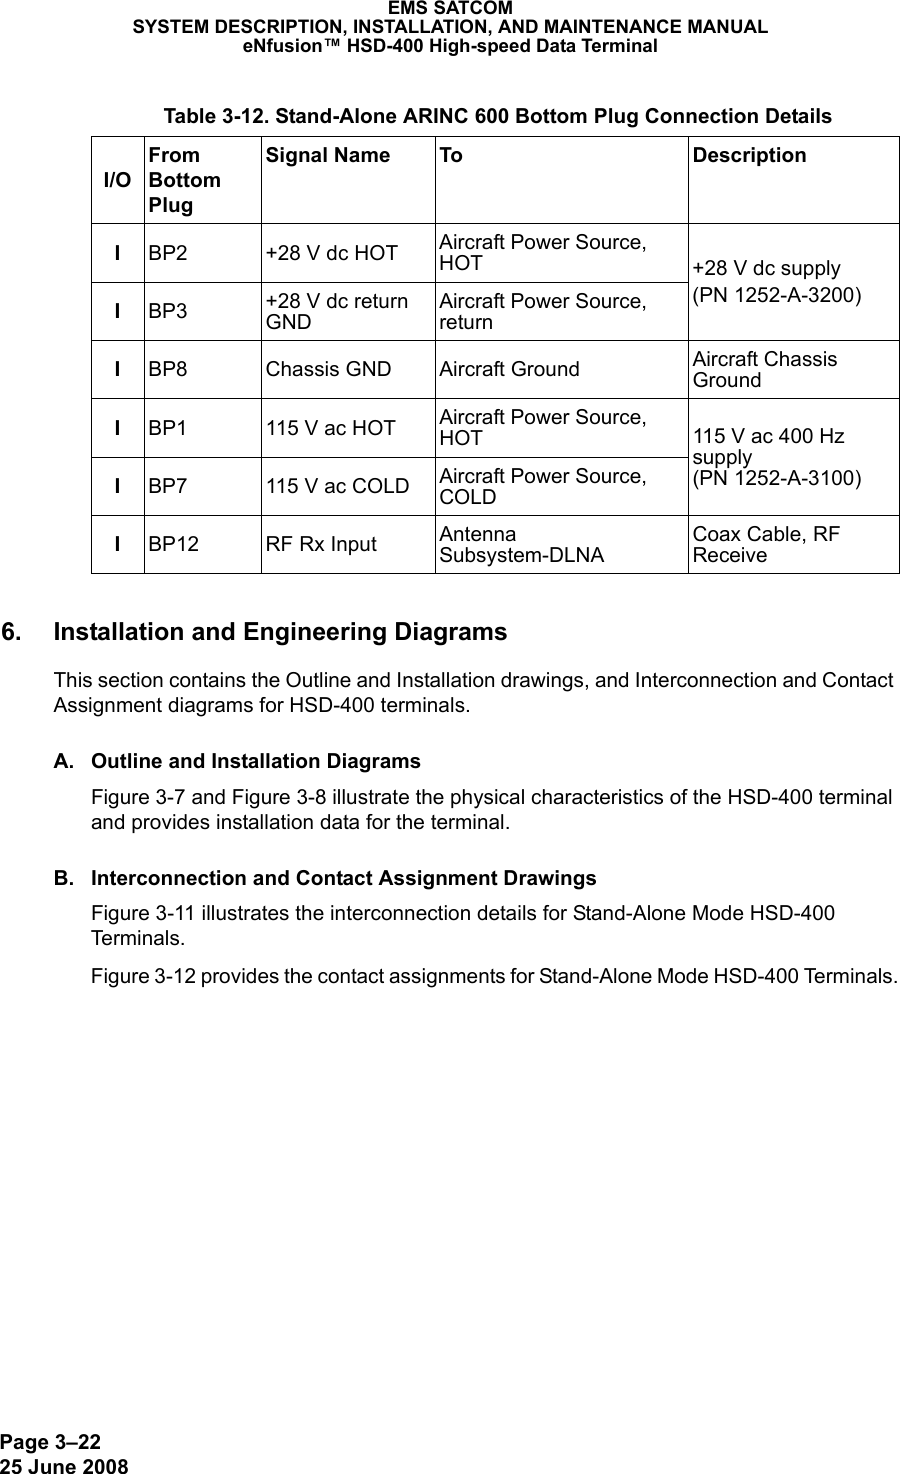 Page 3–2225 June 2008EMS SATCOMSYSTEM DESCRIPTION, INSTALLATION, AND MAINTENANCE MANUALeNfusion™ HSD-400 High-speed Data Terminal6. Installation and Engineering DiagramsThis section contains the Outline and Installation drawings, and Interconnection and Contact Assignment diagrams for HSD-400 terminals. A. Outline and Installation DiagramsFigure 3-7 and Figure 3-8 illustrate the physical characteristics of the HSD-400 terminal and provides installation data for the terminal. B. Interconnection and Contact Assignment DrawingsFigure 3-11 illustrates the interconnection details for Stand-Alone Mode HSD-400 Terminals .Figure 3-12 provides the contact assignments for Stand-Alone Mode HSD-400 Terminals. Table 3-12. Stand-Alone ARINC 600 Bottom Plug Connection Details I/OFrom Bottom PlugSignal Name To DescriptionIBP2 +28 V dc HOT Aircraft Power Source, HOT +28 V dc supply(PN 1252-A-3200)IBP3 +28 V dc return GNDAircraft Power Source, returnIBP8 Chassis GND Aircraft Ground Aircraft Chassis GroundIBP1 115 V ac HOT Aircraft Power Source, HOT 115 V ac 400 Hz supply (PN 1252-A-3100)IBP7 115 V ac COLD Aircraft Power Source, COLDIBP12 RF Rx Input Antenna Subsystem-DLNACoax Cable, RF Receive 